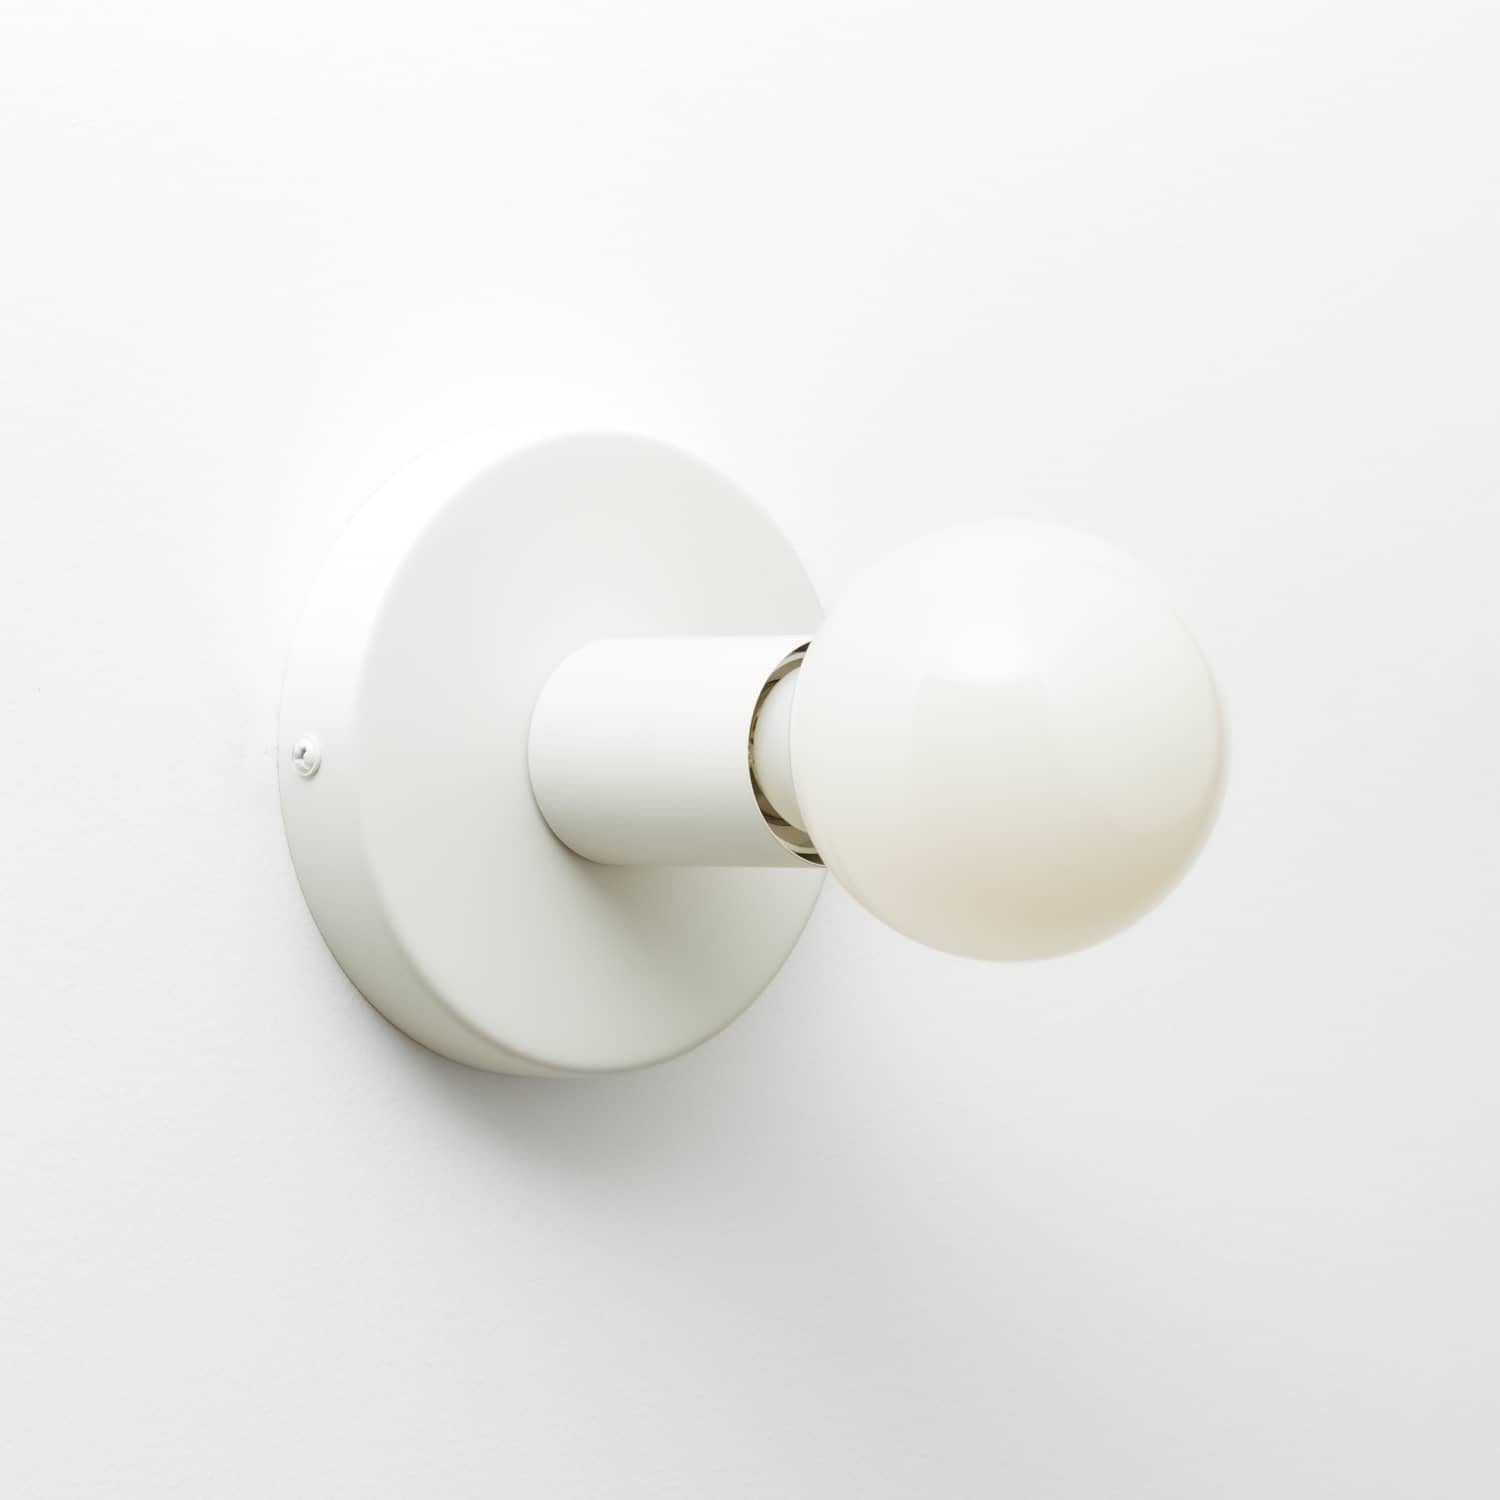 Button Light in Matte White finish pictured with G25 milk glass light bulb